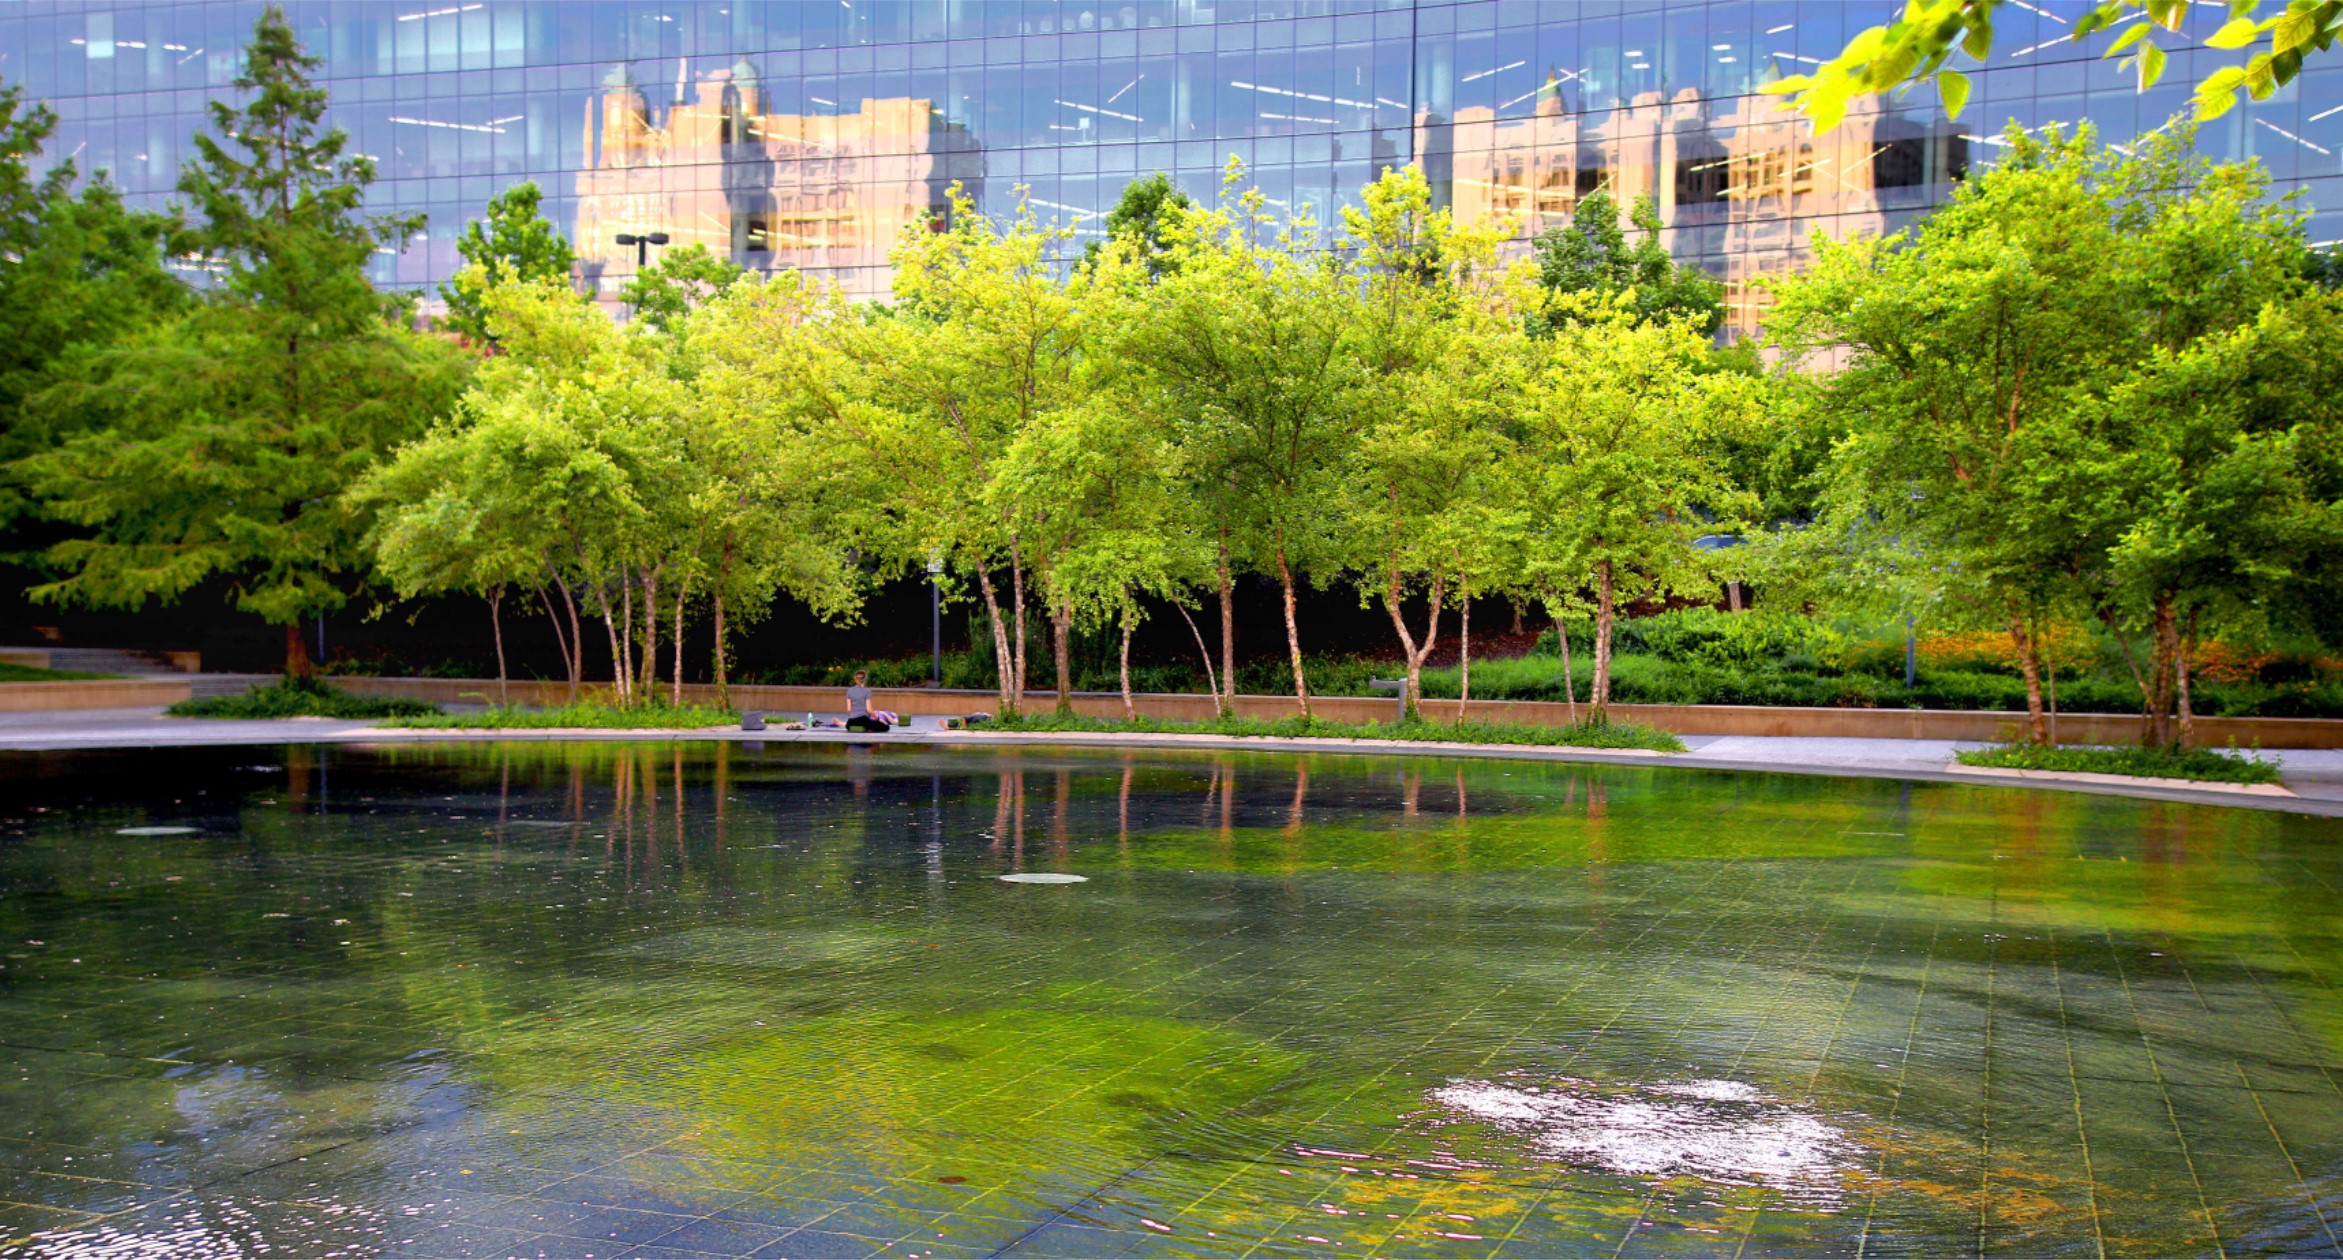 Beautiful buildings reflected on glass building behind trees